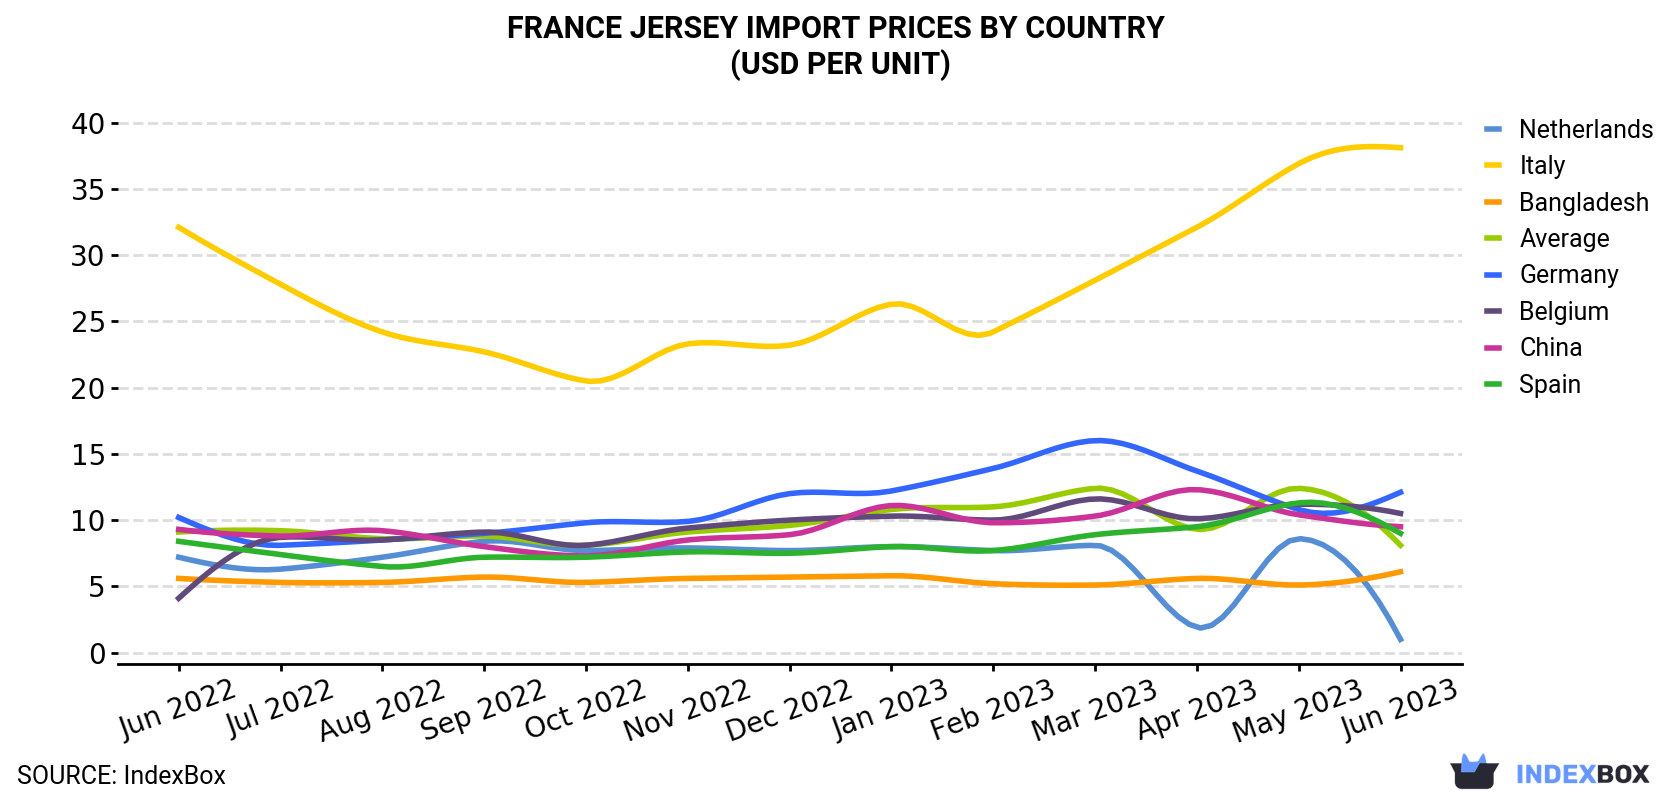 France Jersey Import Prices By Country (USD Per Unit)